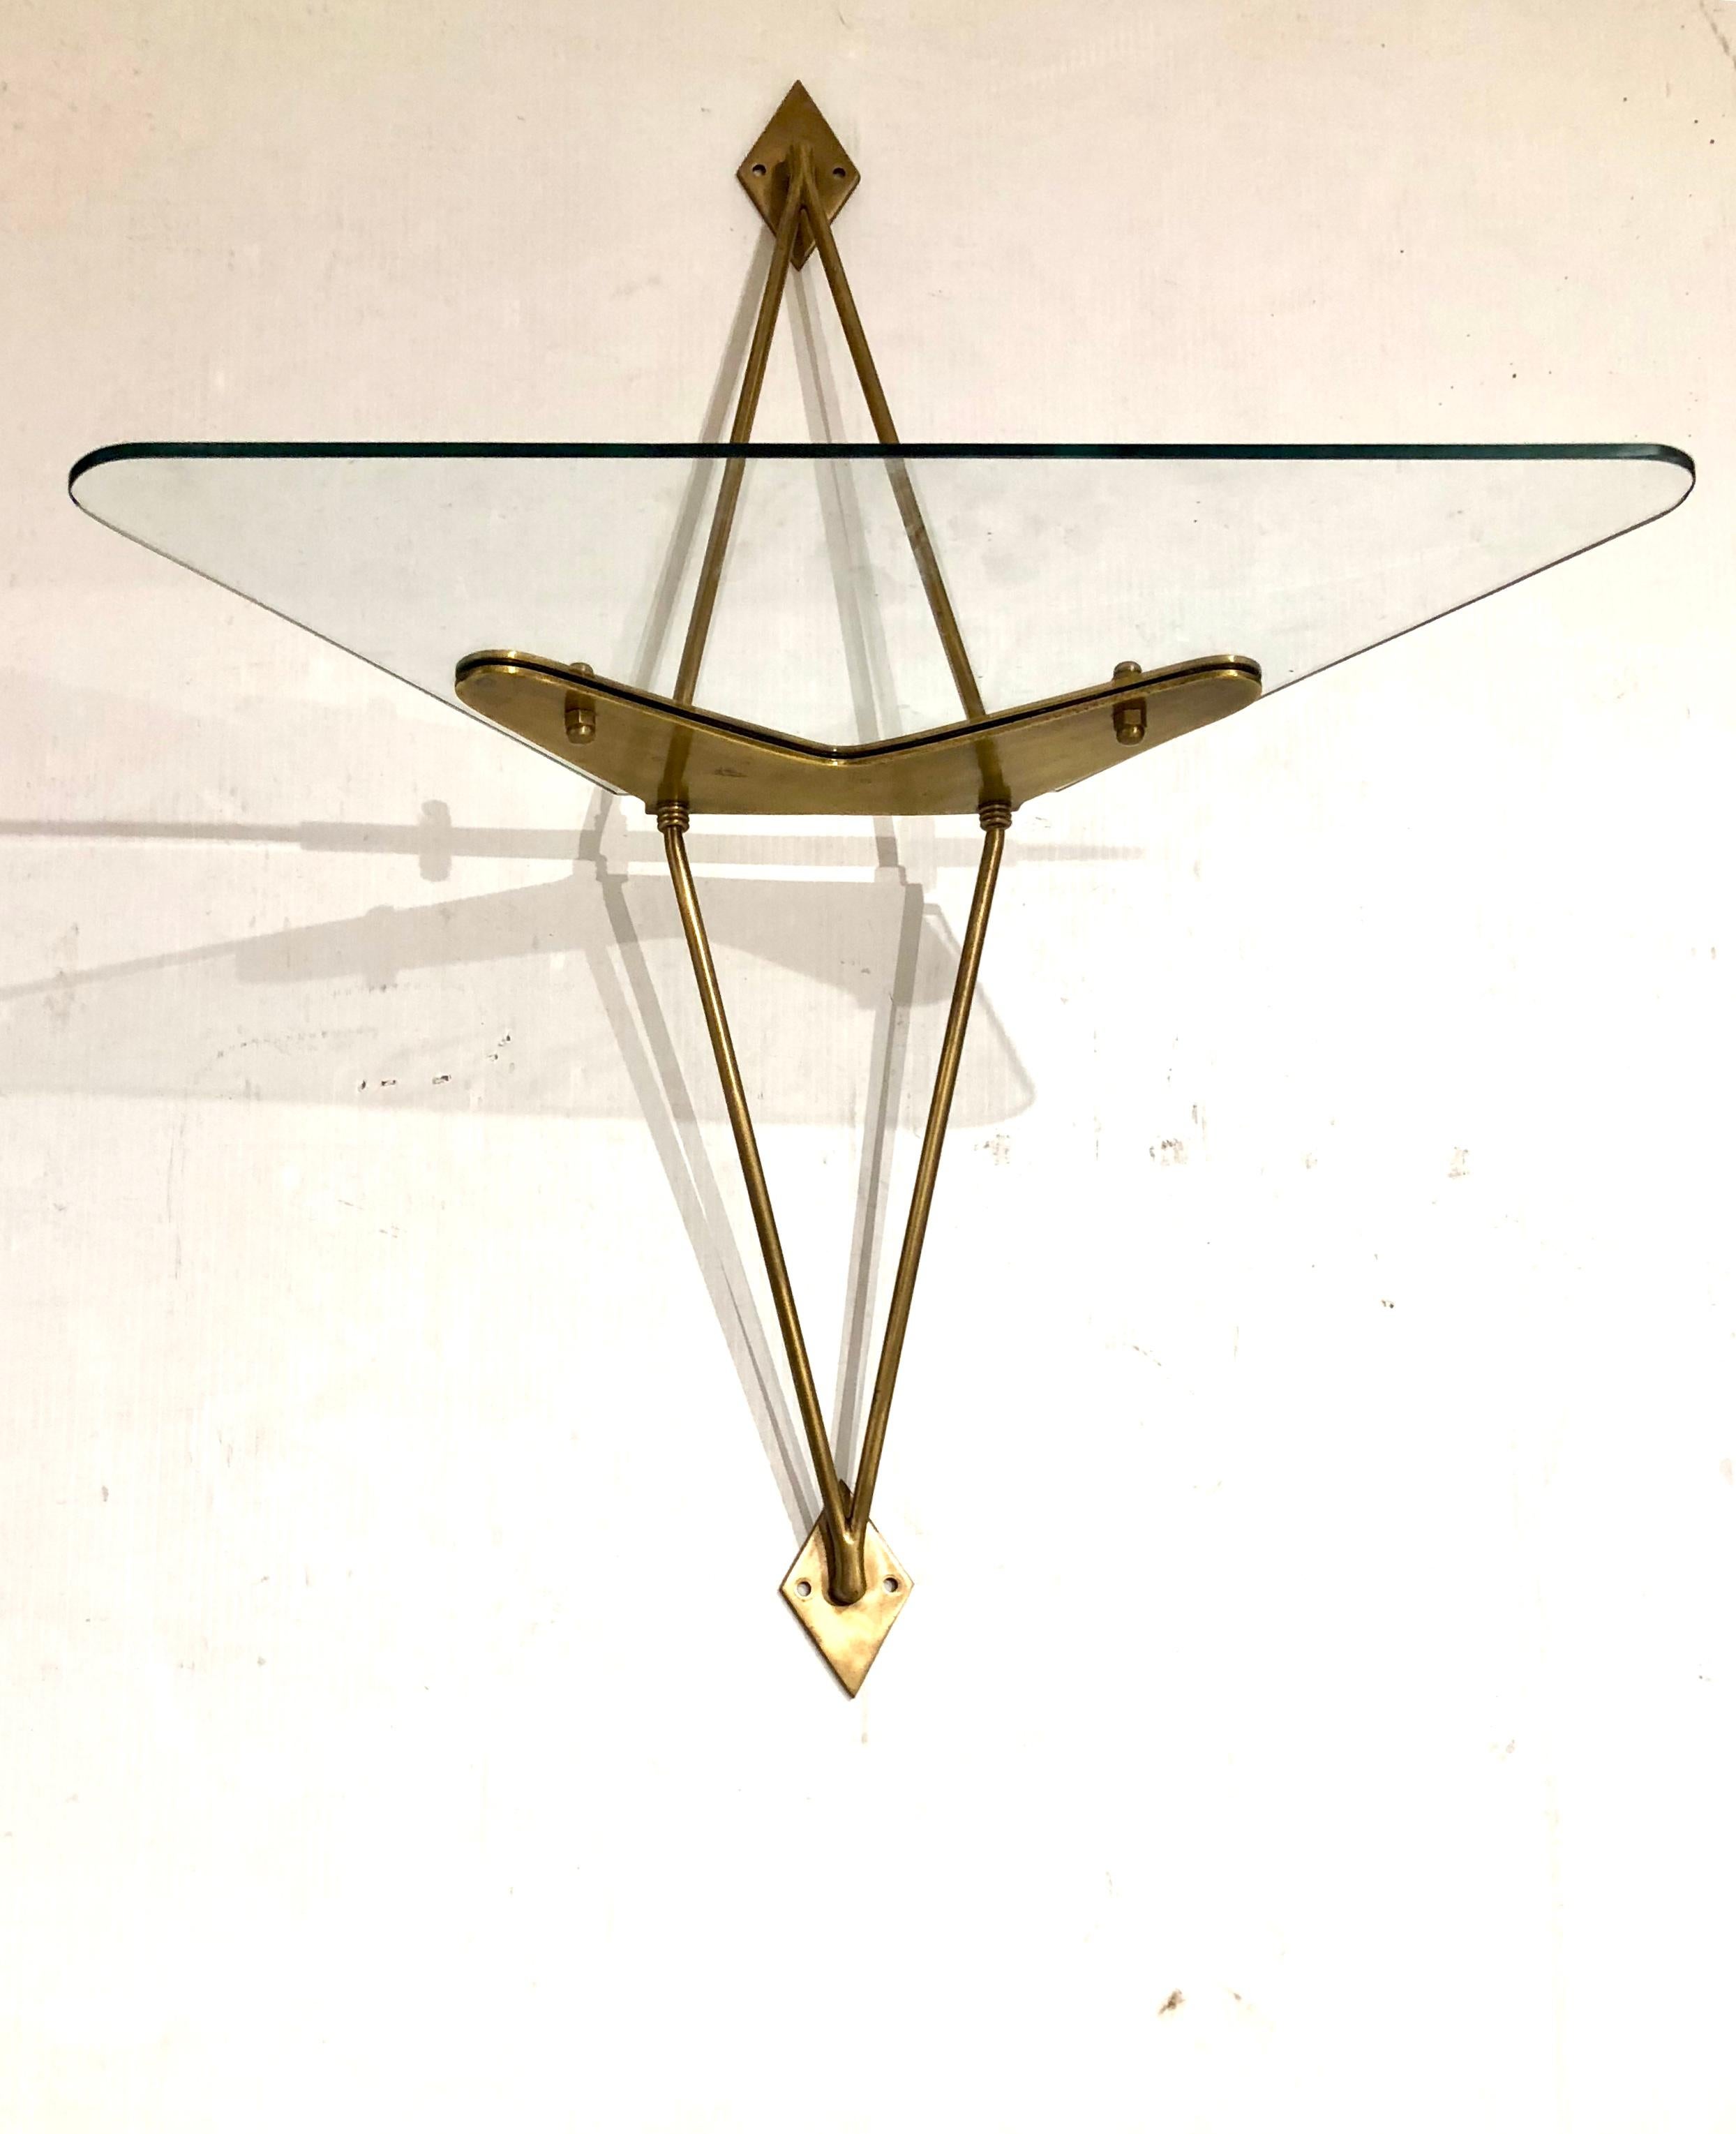 Brass and glass wall-mounted angle display shelf attributed to Fontana Arte, incredible and rare piece of solid brass and glass shelf, we believe its by Fontana Arte, circa 1950s in the style of Gio Ponti excellent condition no chips or cracks.